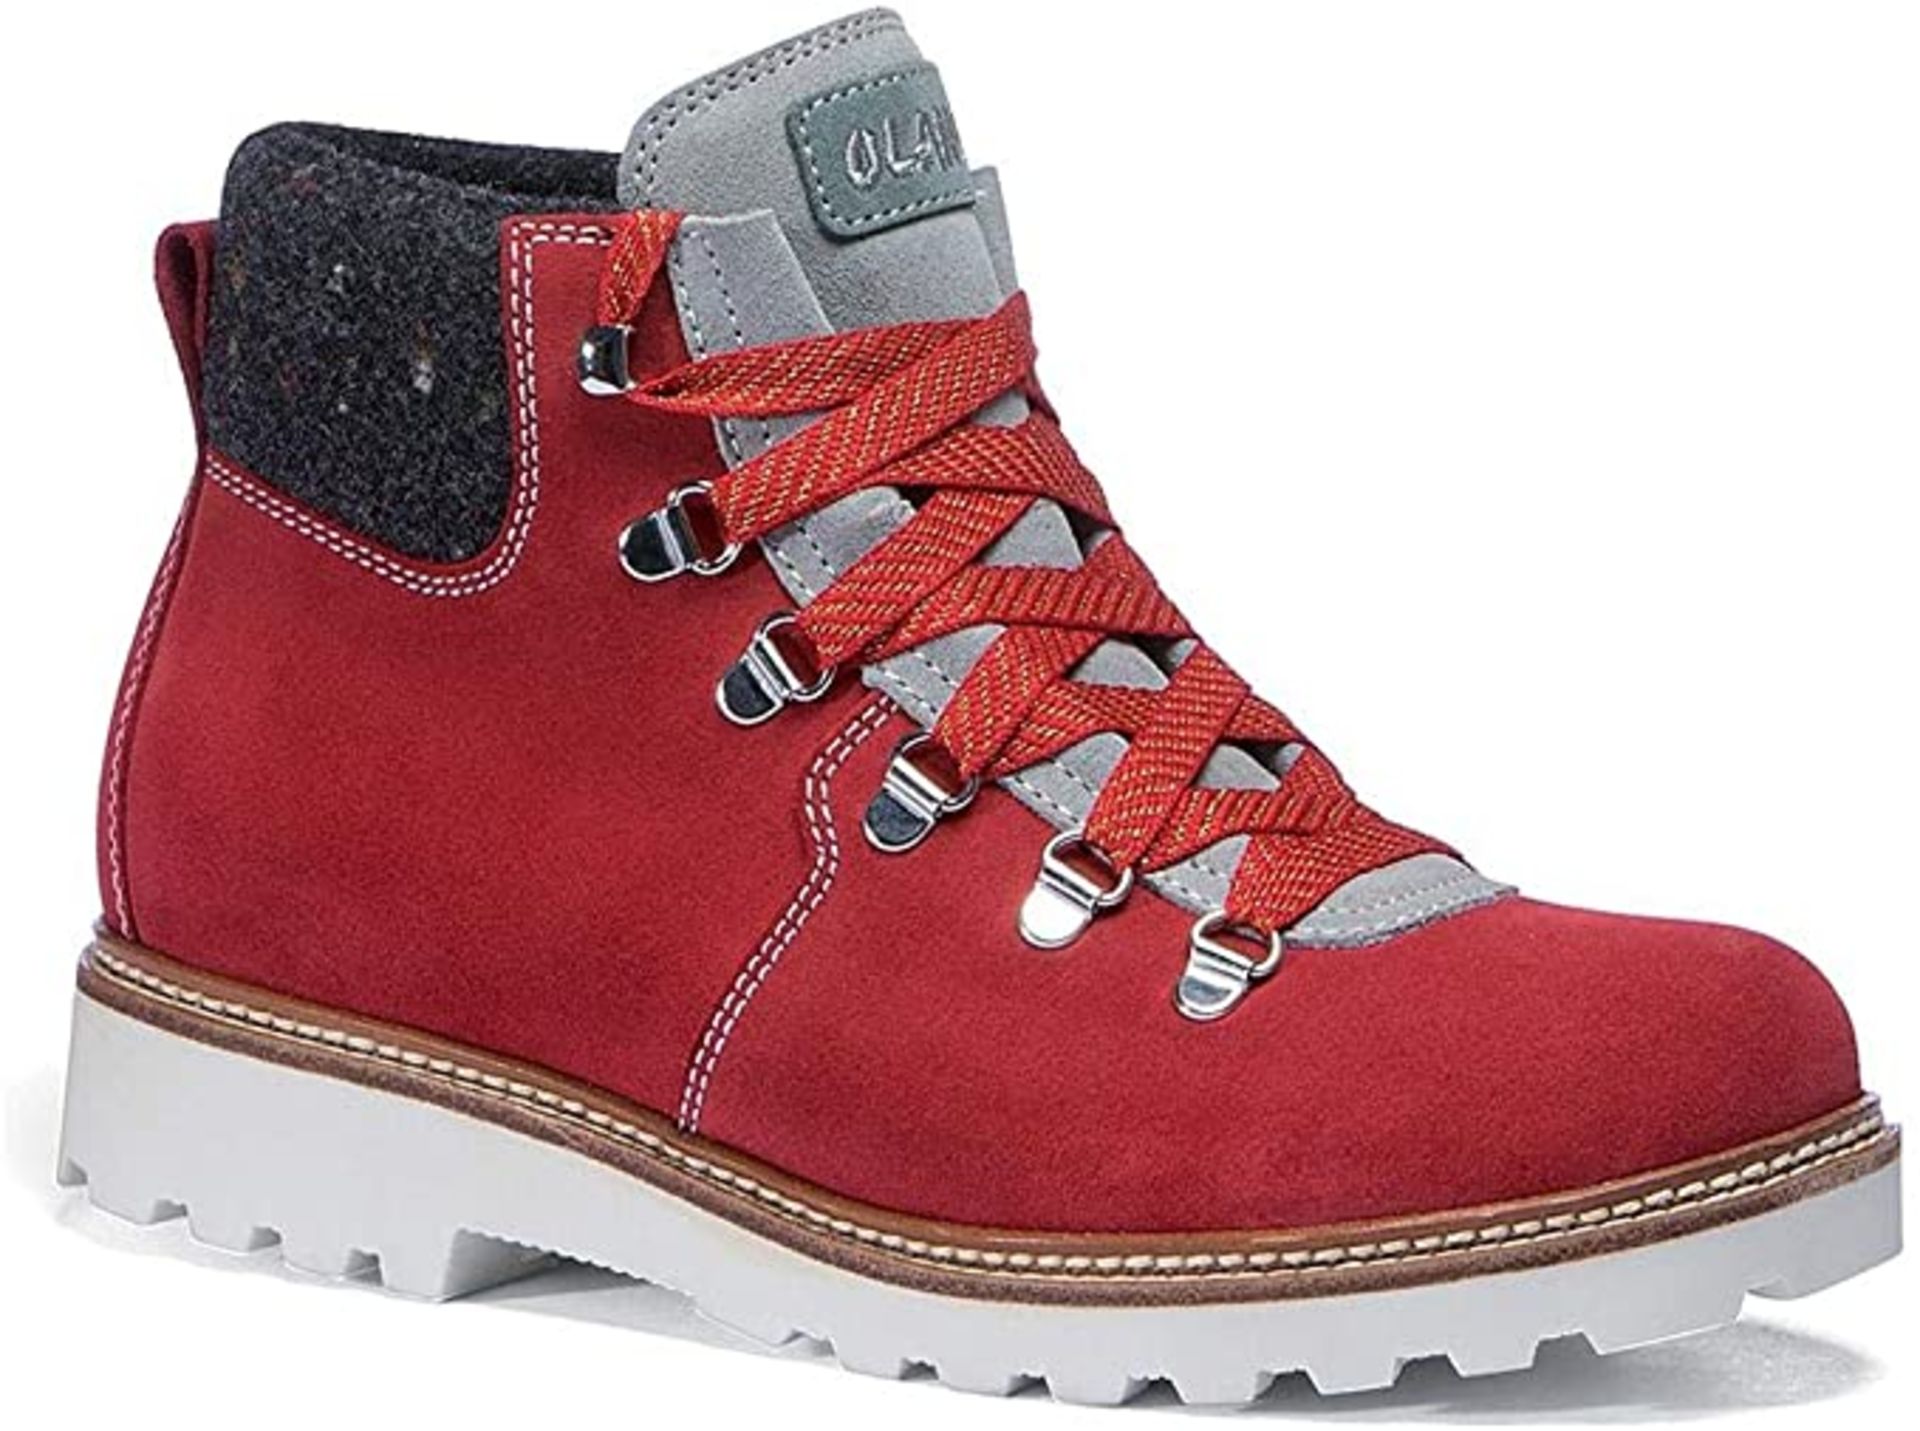 1 x Pair of Designer Olang Merano BTX 815 Rosso Women's Winter Boots - Euro Size 38 - Brand New - Image 3 of 4